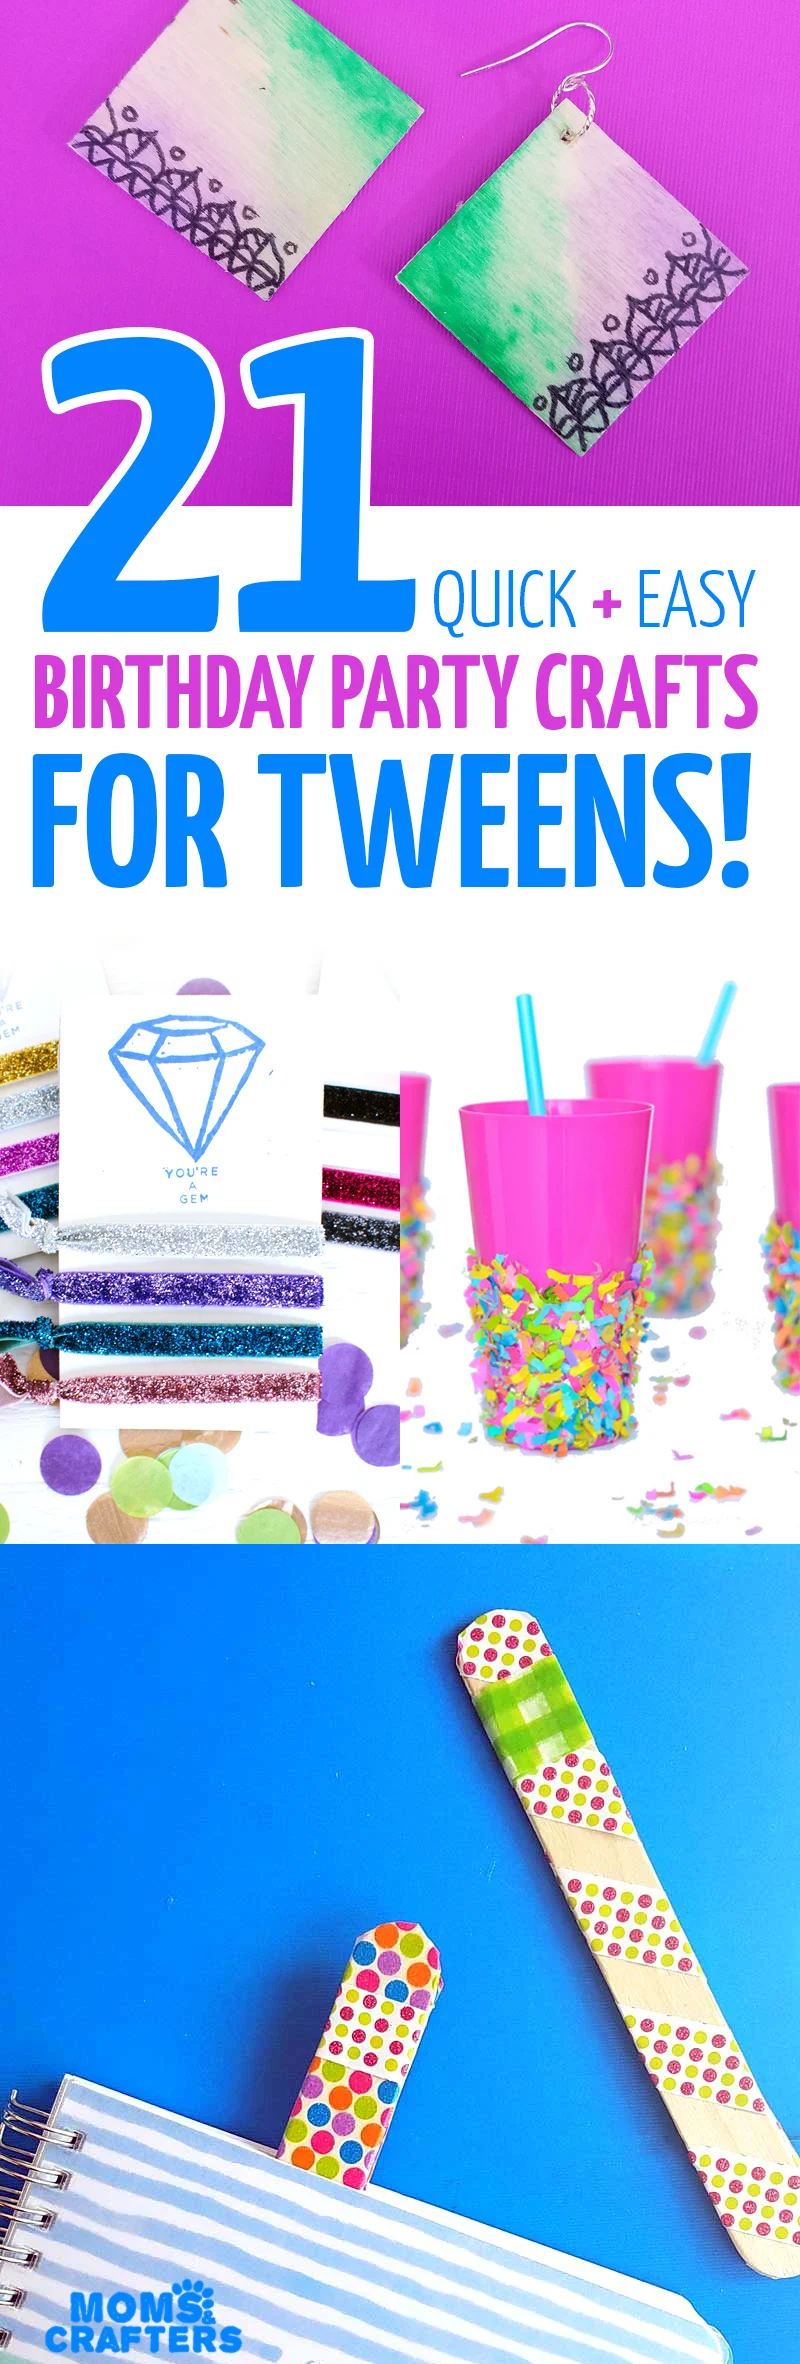 Birthday Party Crafts for Tweens * Moms and Crafters